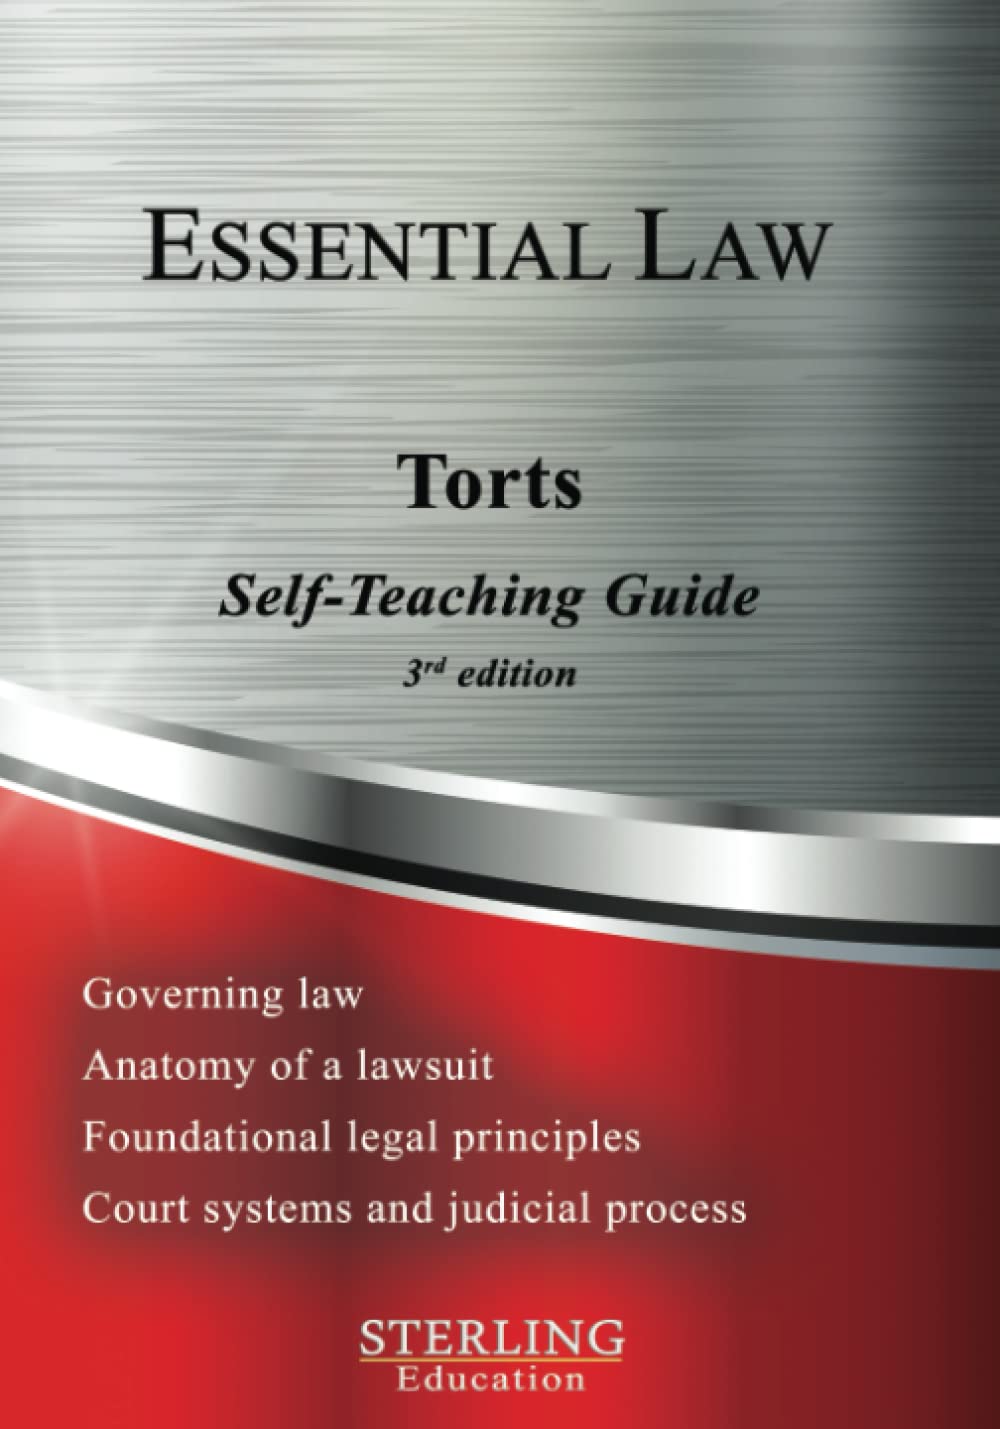 Torts: Essential Law Self-Teaching Guide (Essential Law Self-Teaching Guides)